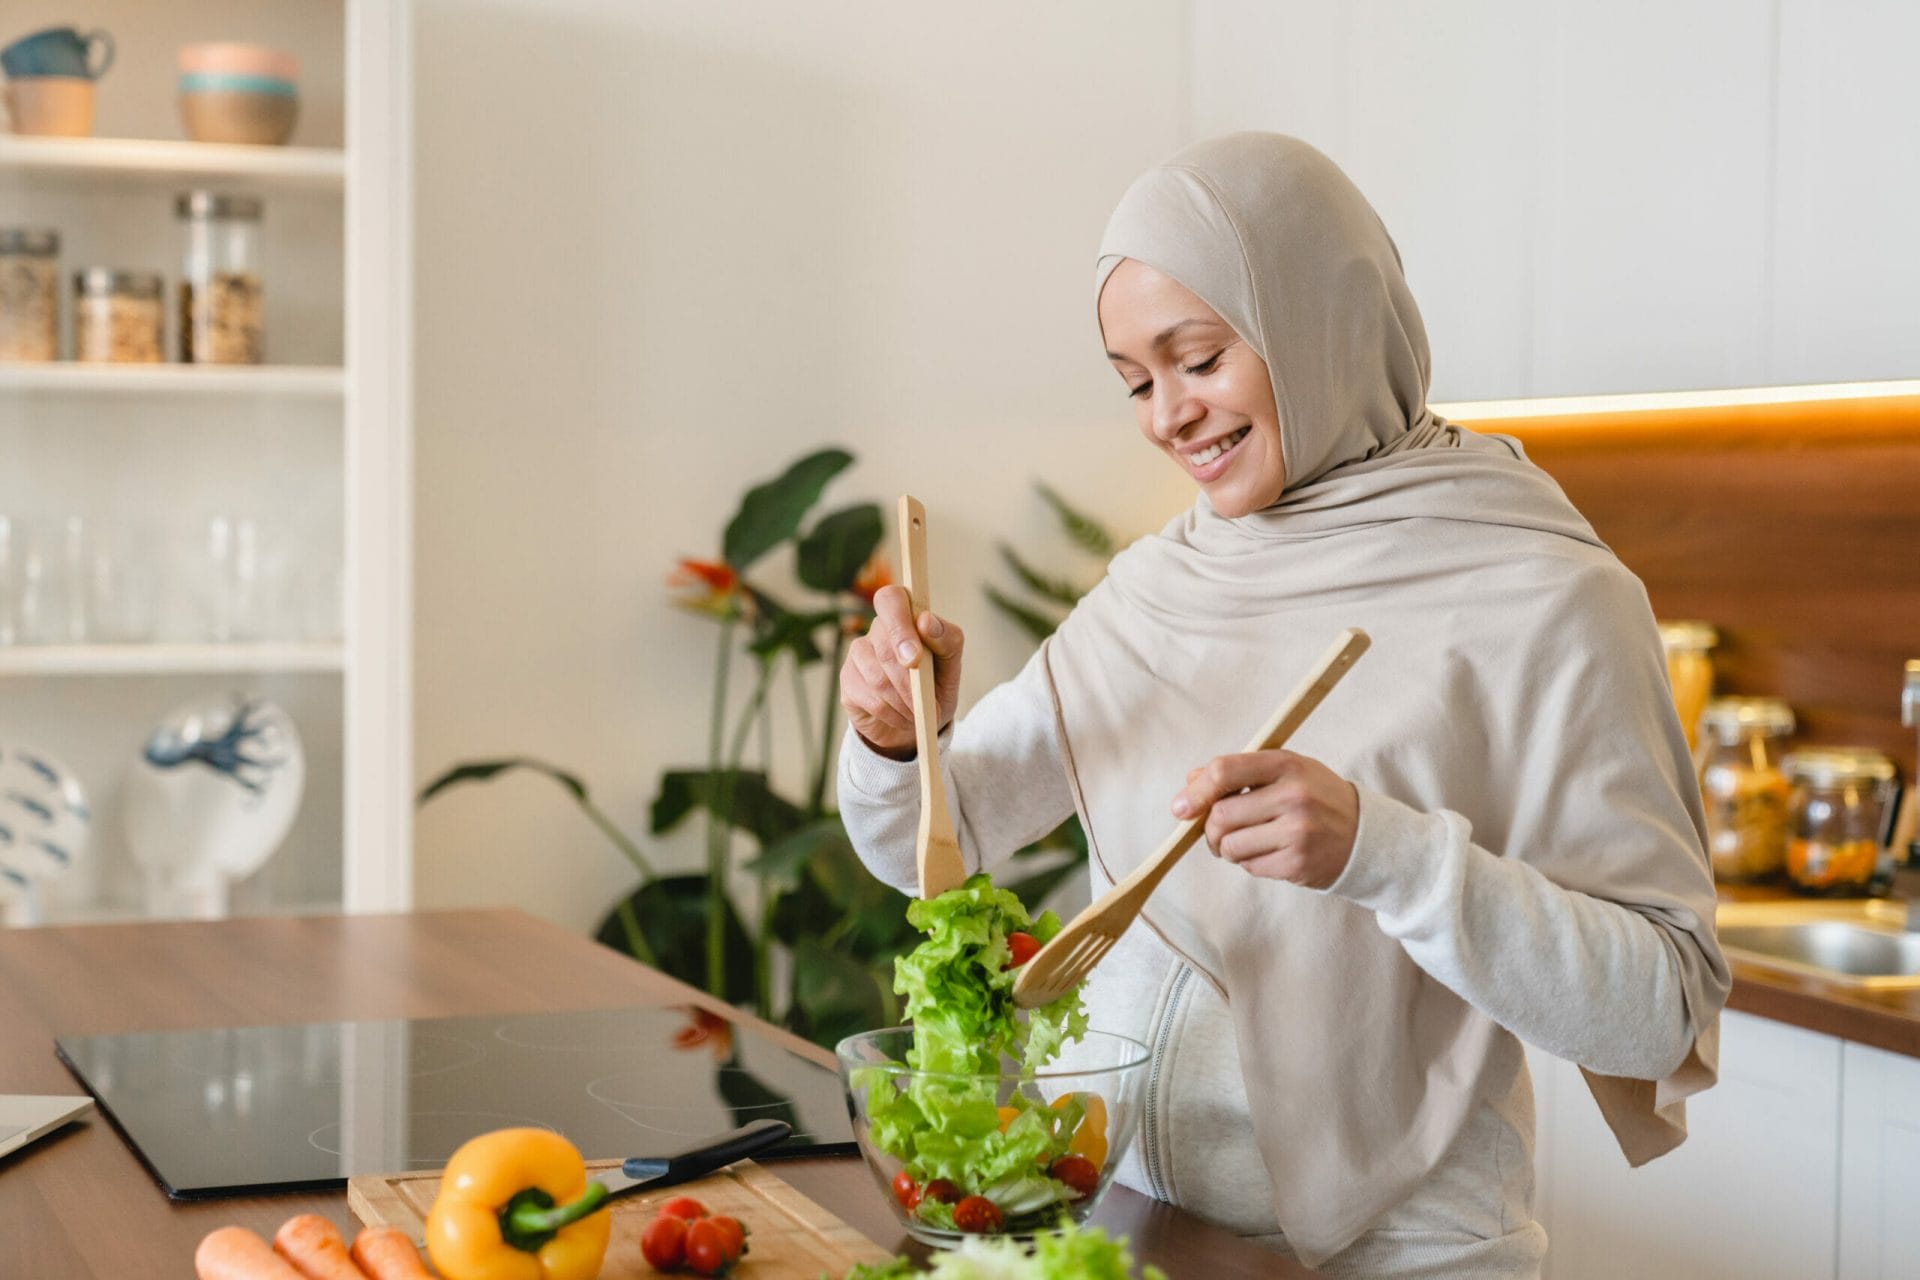 Halal Vitamins: What does that mean? Explore now